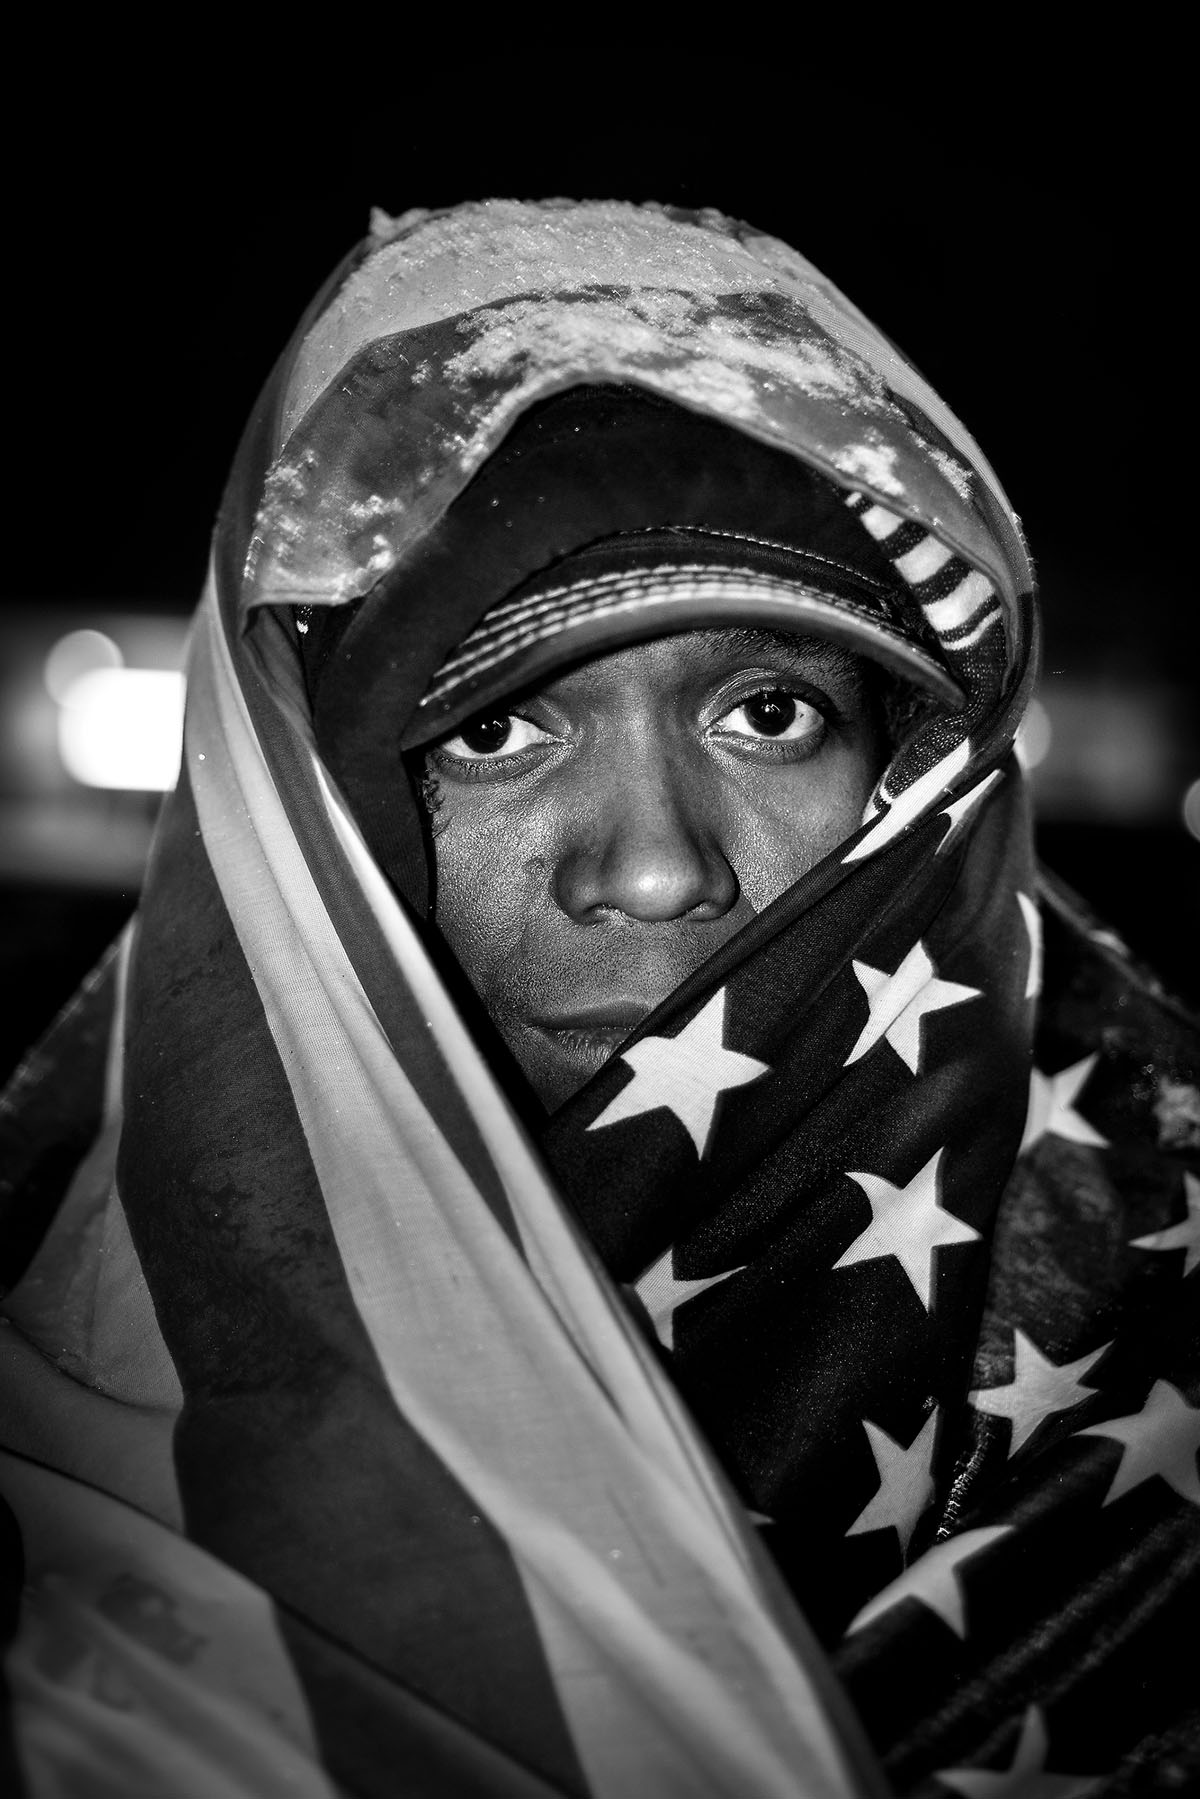 A protester at Ferguson police headquarters two nights after the Grand Jury decision, November 24, 2014